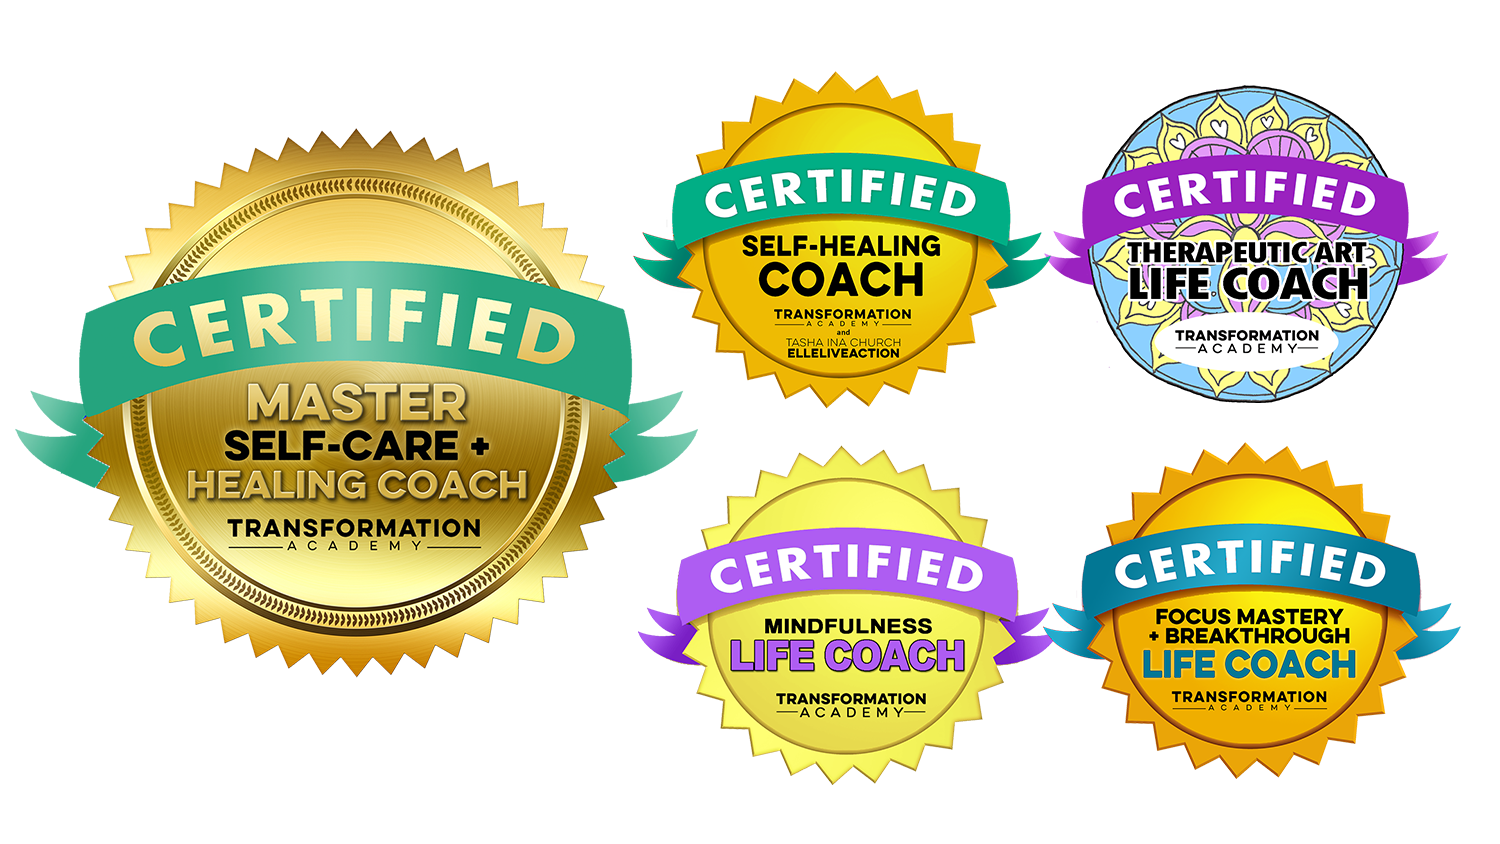 Master Self Care and Healing Coach Certification Transformation Academy